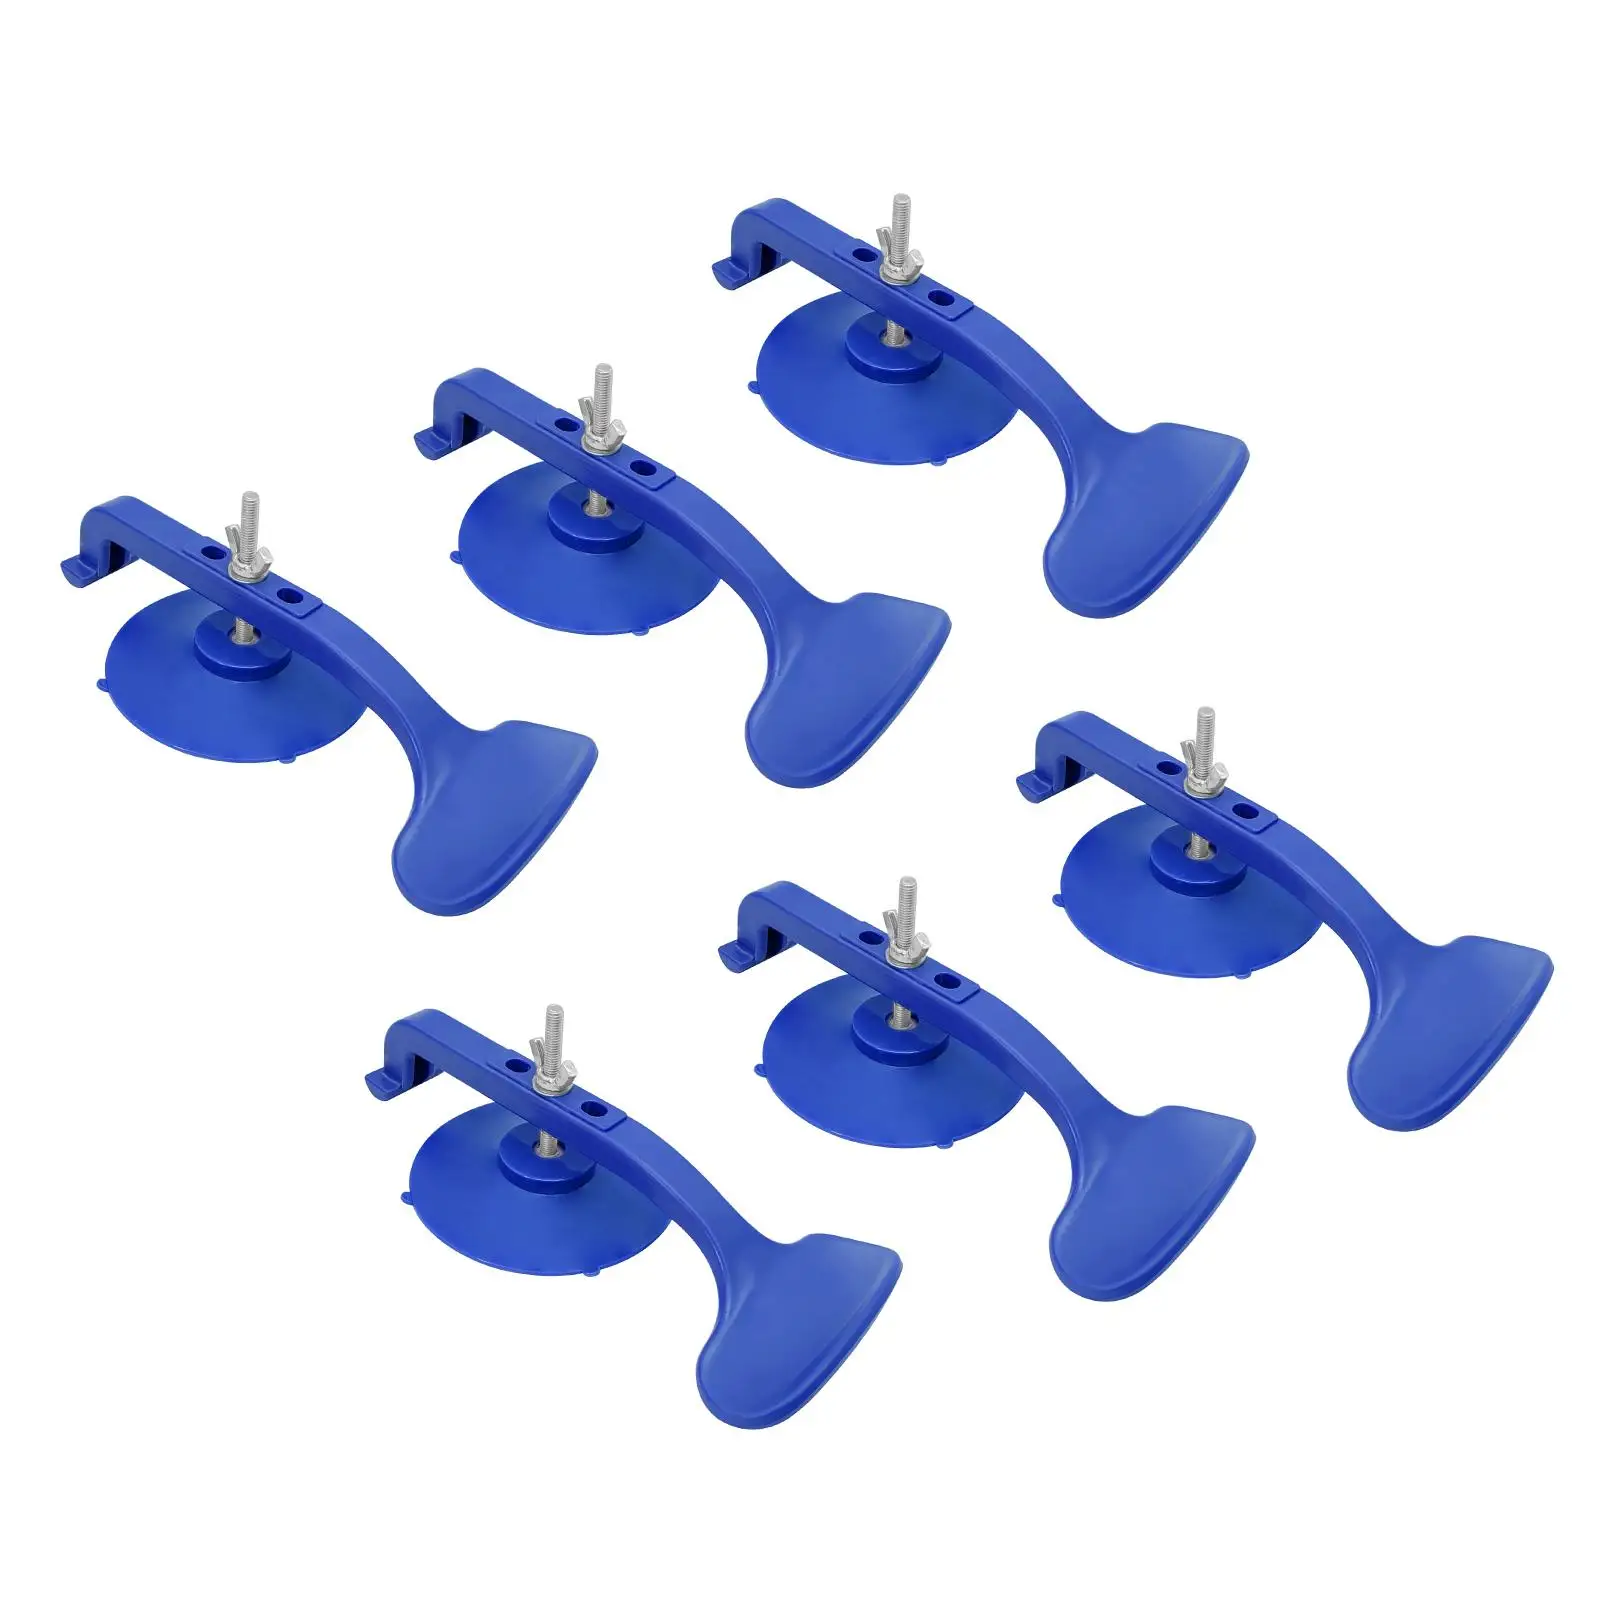 6x High Quality Suction Clamp Set Easy to Operate for Convertible Glass Windshield Repair